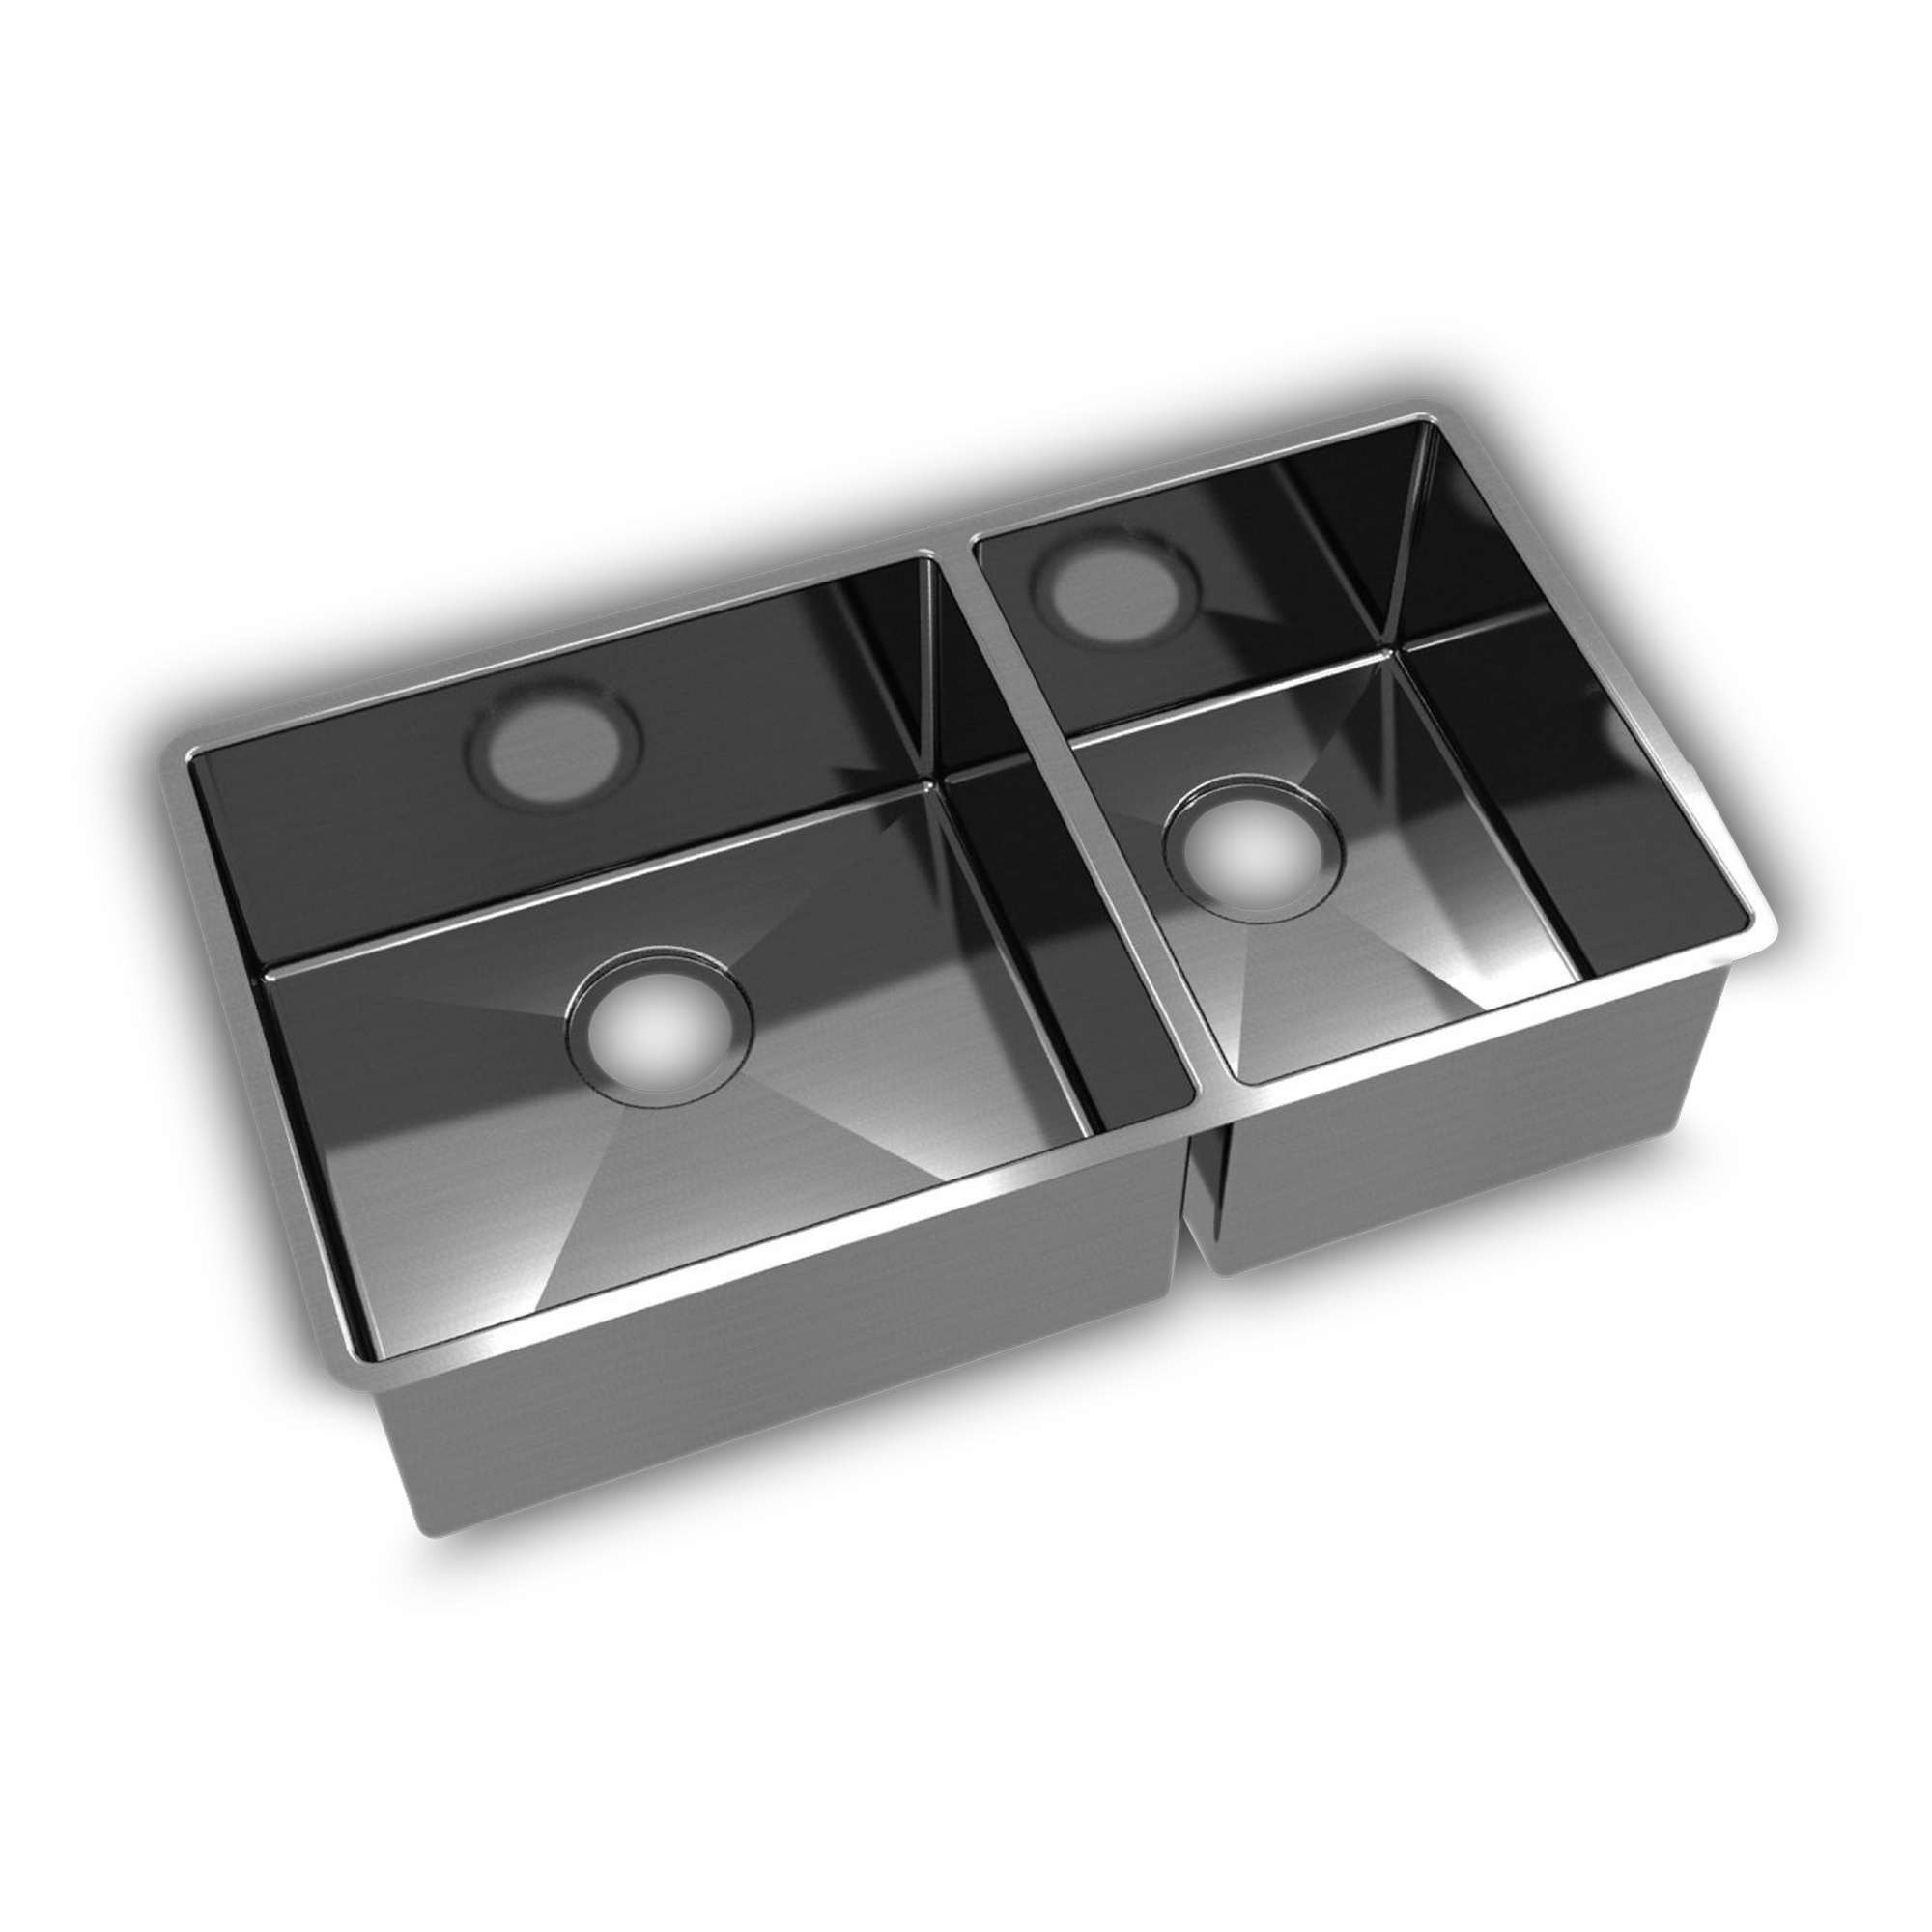 The kitchen sink is a home essential! Stainless steel kitchen sink, 1-1/2 bowl, with rear drains.